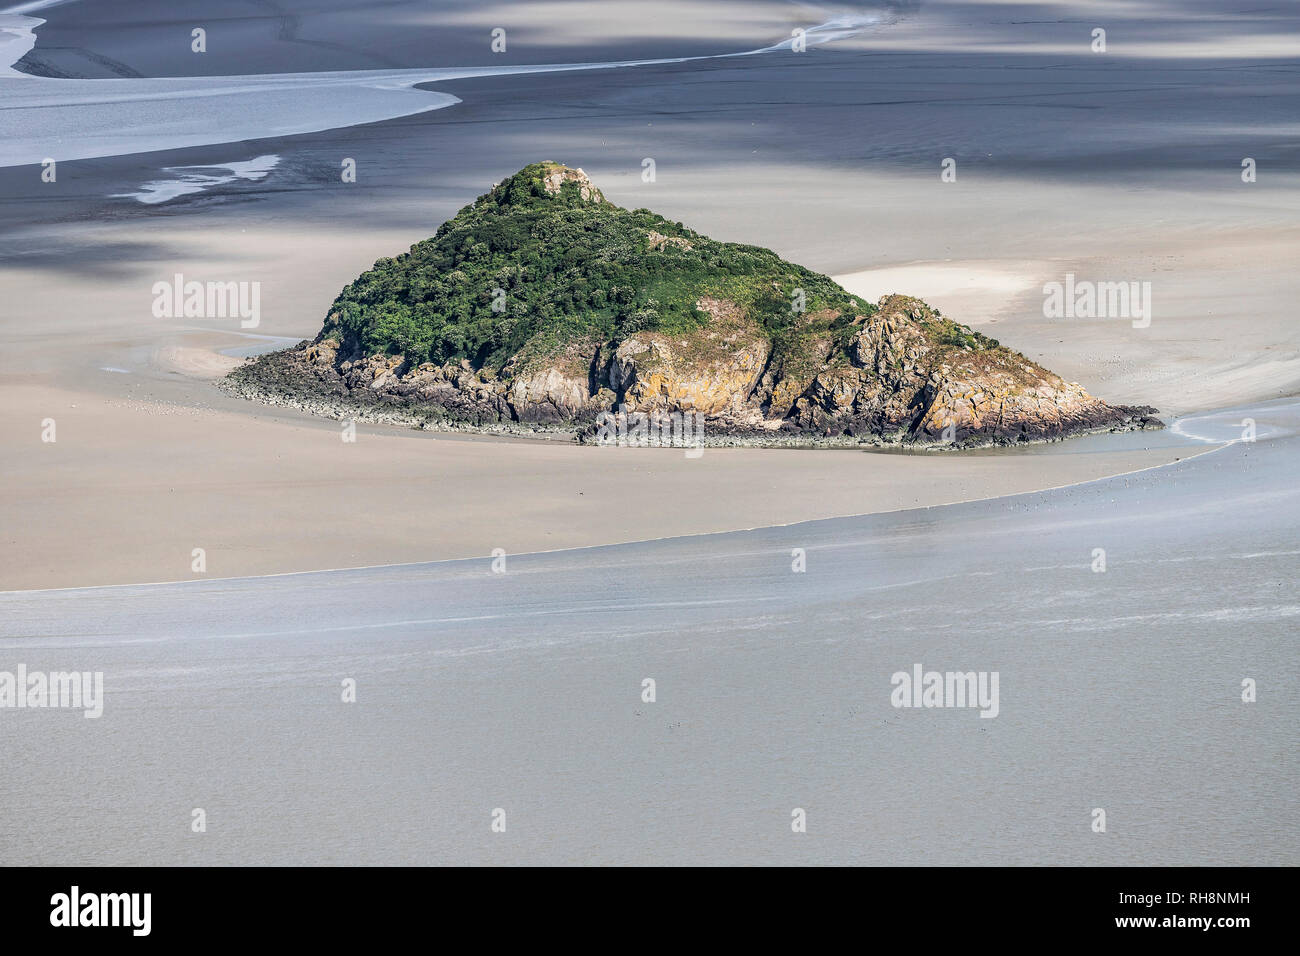 Aerial view of Tombelaine, small tidal island, at rising tide, in the bay of Le Mont-Saint-Michel (St Michael's Mount) in Normandy, north-western Fran Stock Photo